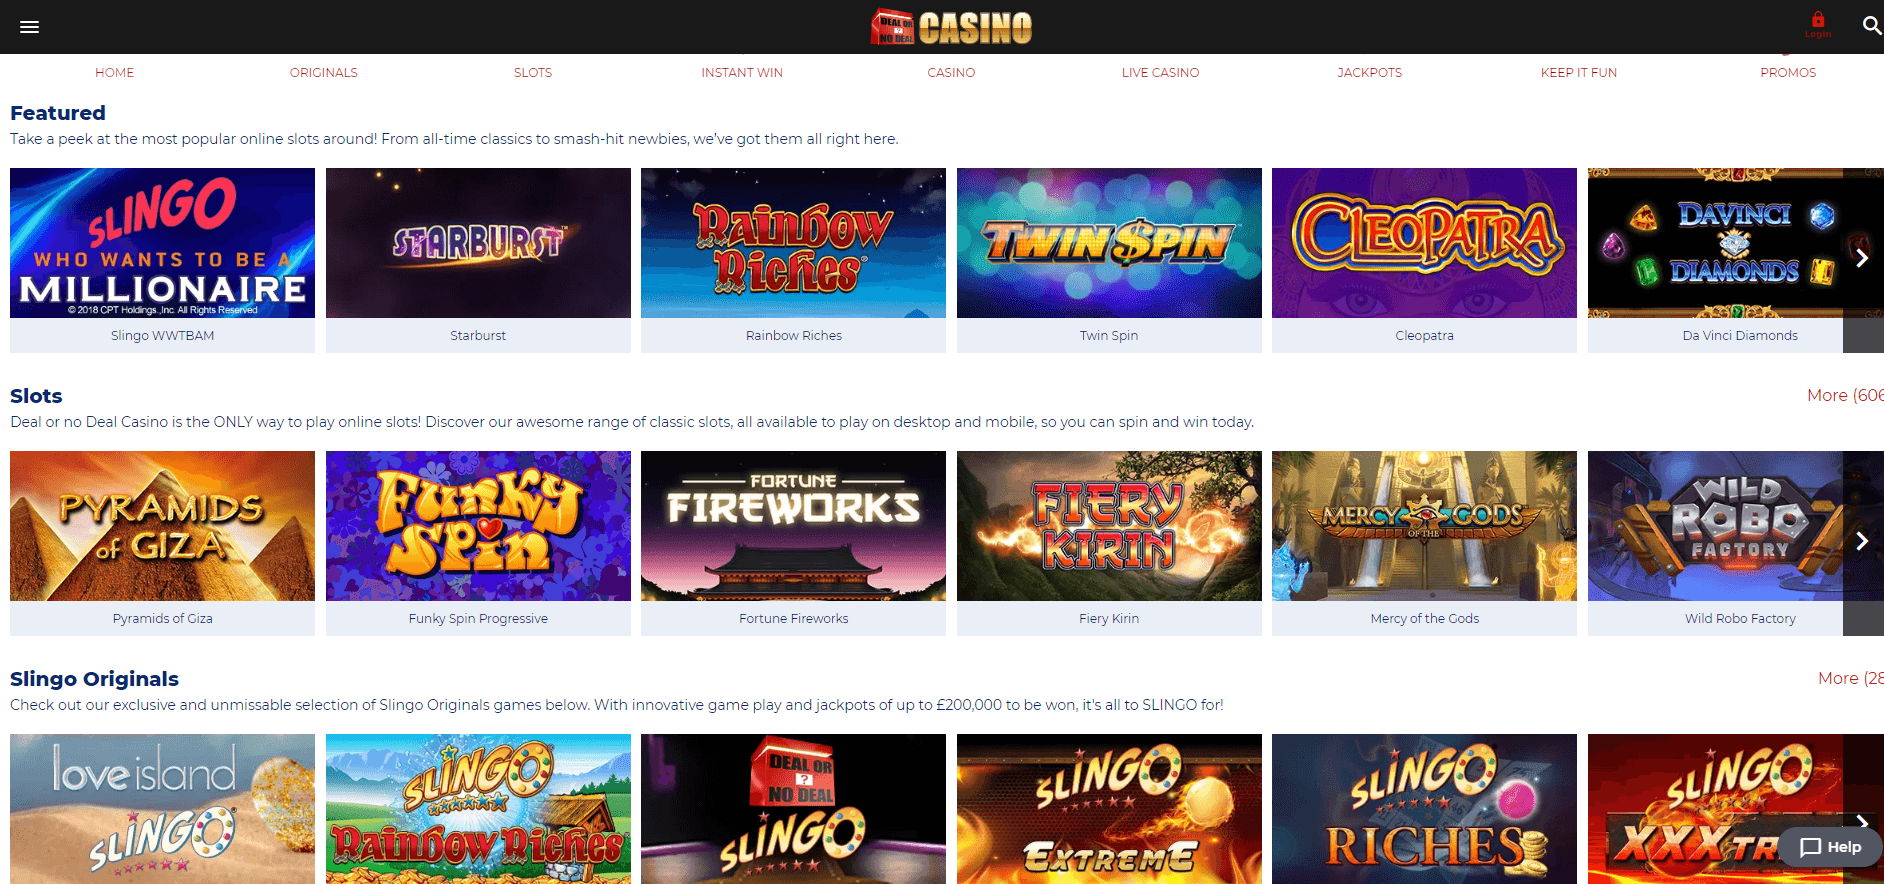 Deal Or No Deal Casino Game Locations